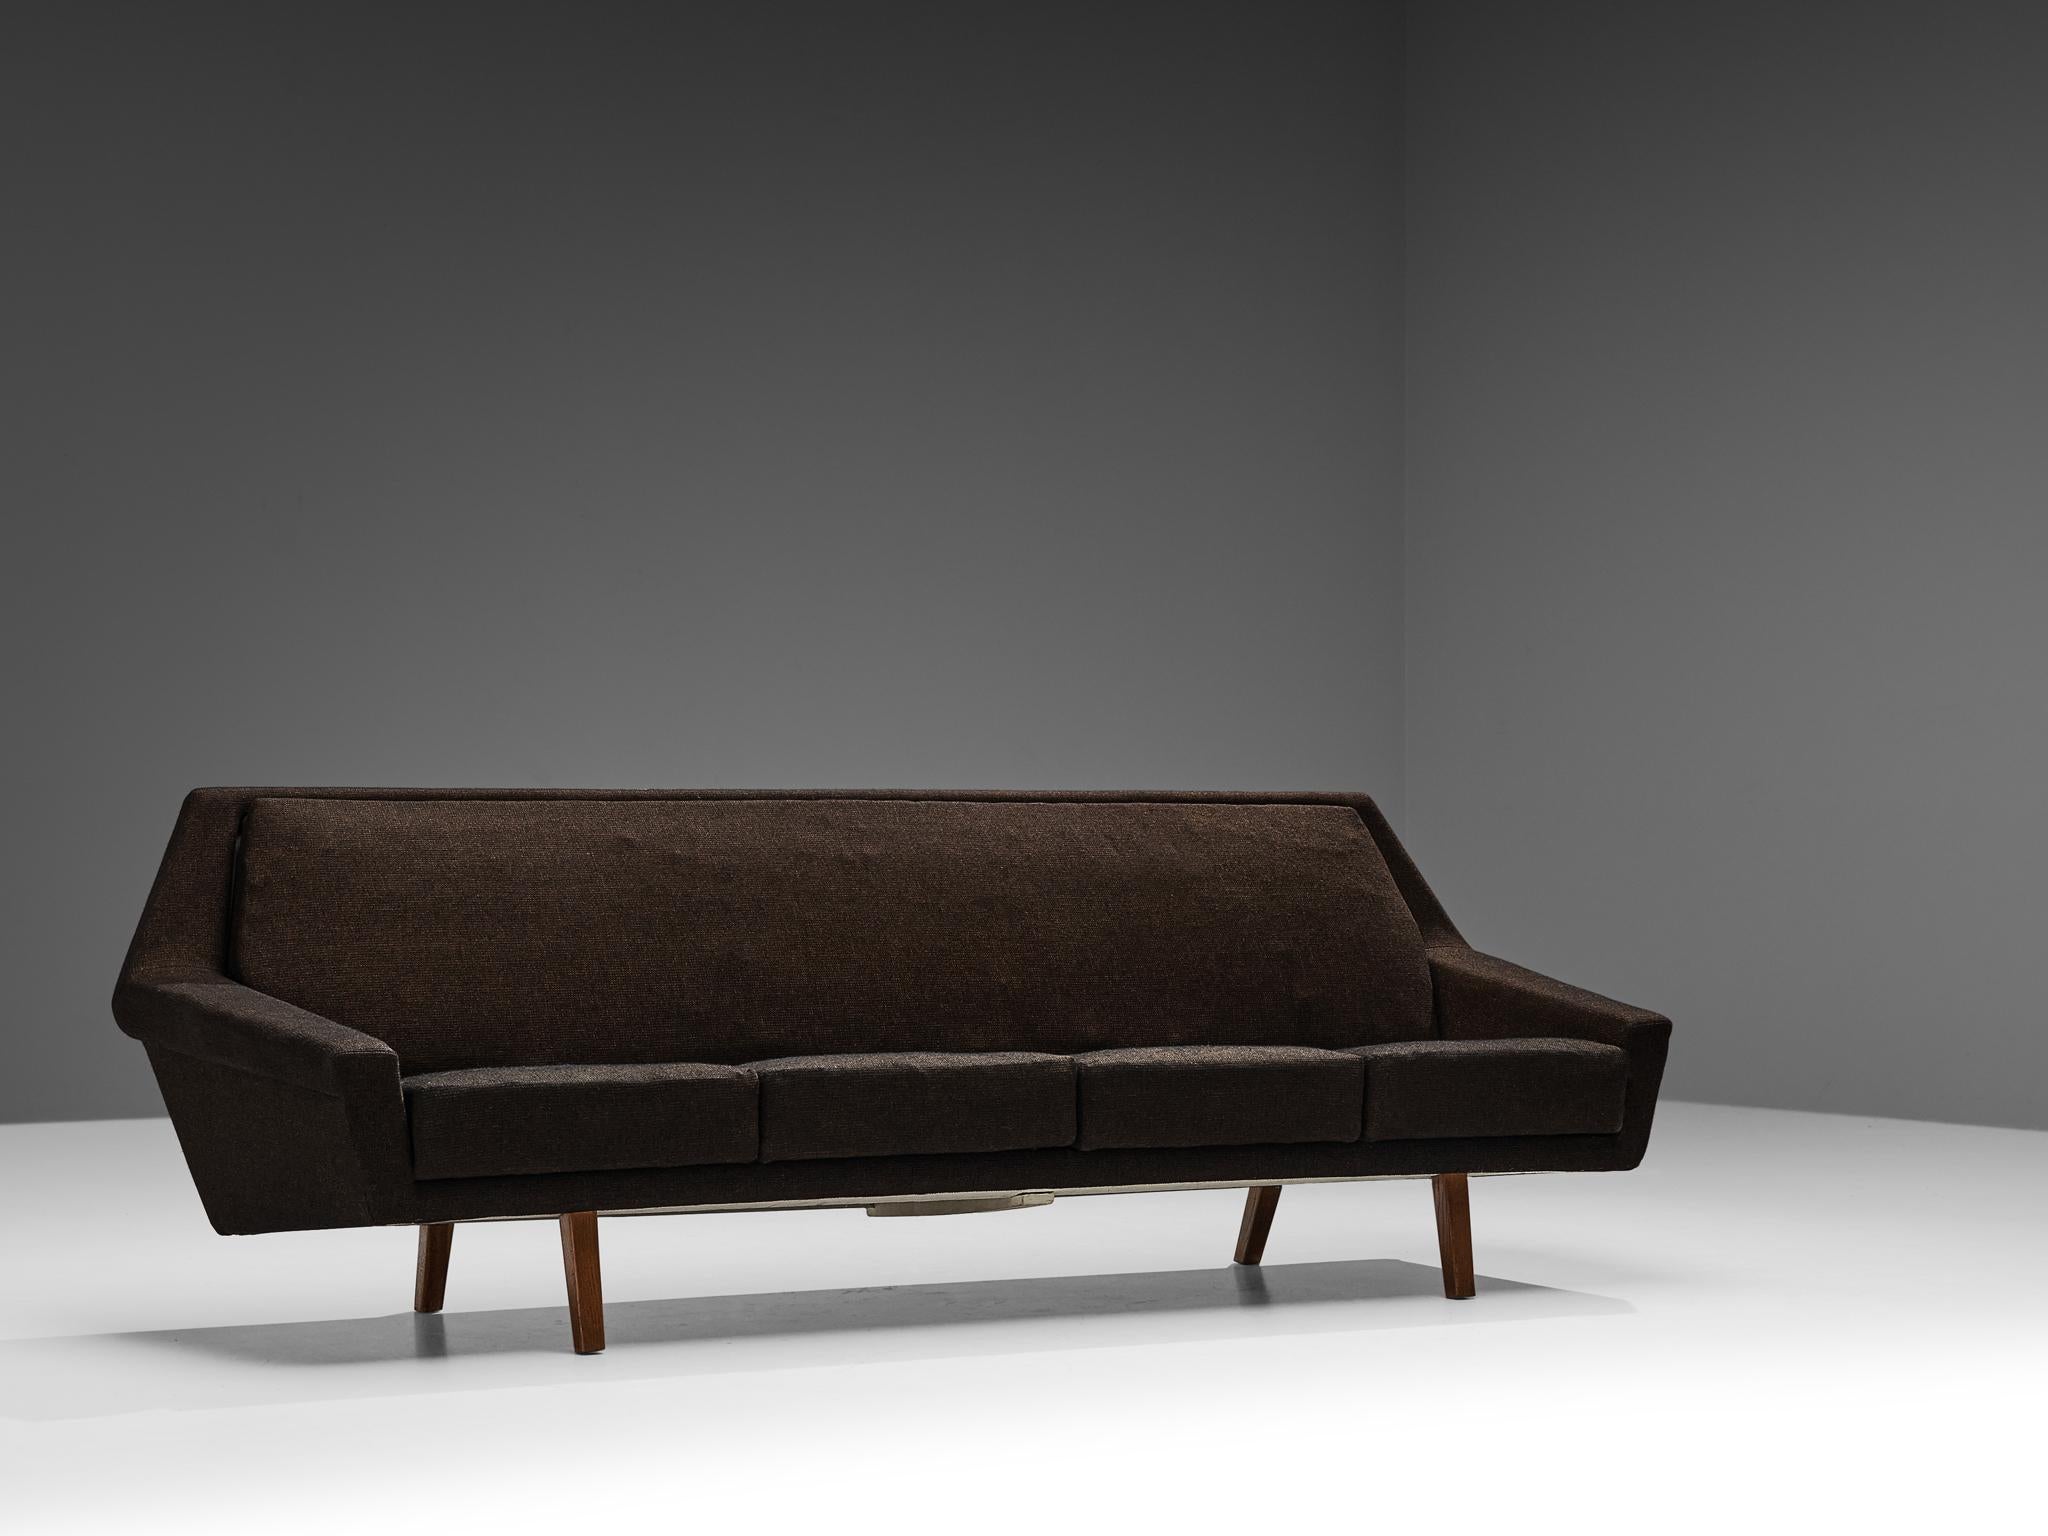 Sofa, fabric, oak, Scandinavia, 1960s

Elegant and spacious four seat sofa made in Scandinavia in the 1960s. The design of this sofa is angular and sharp in its execution. It is very balanced in its form and proportions. Four seating cushions